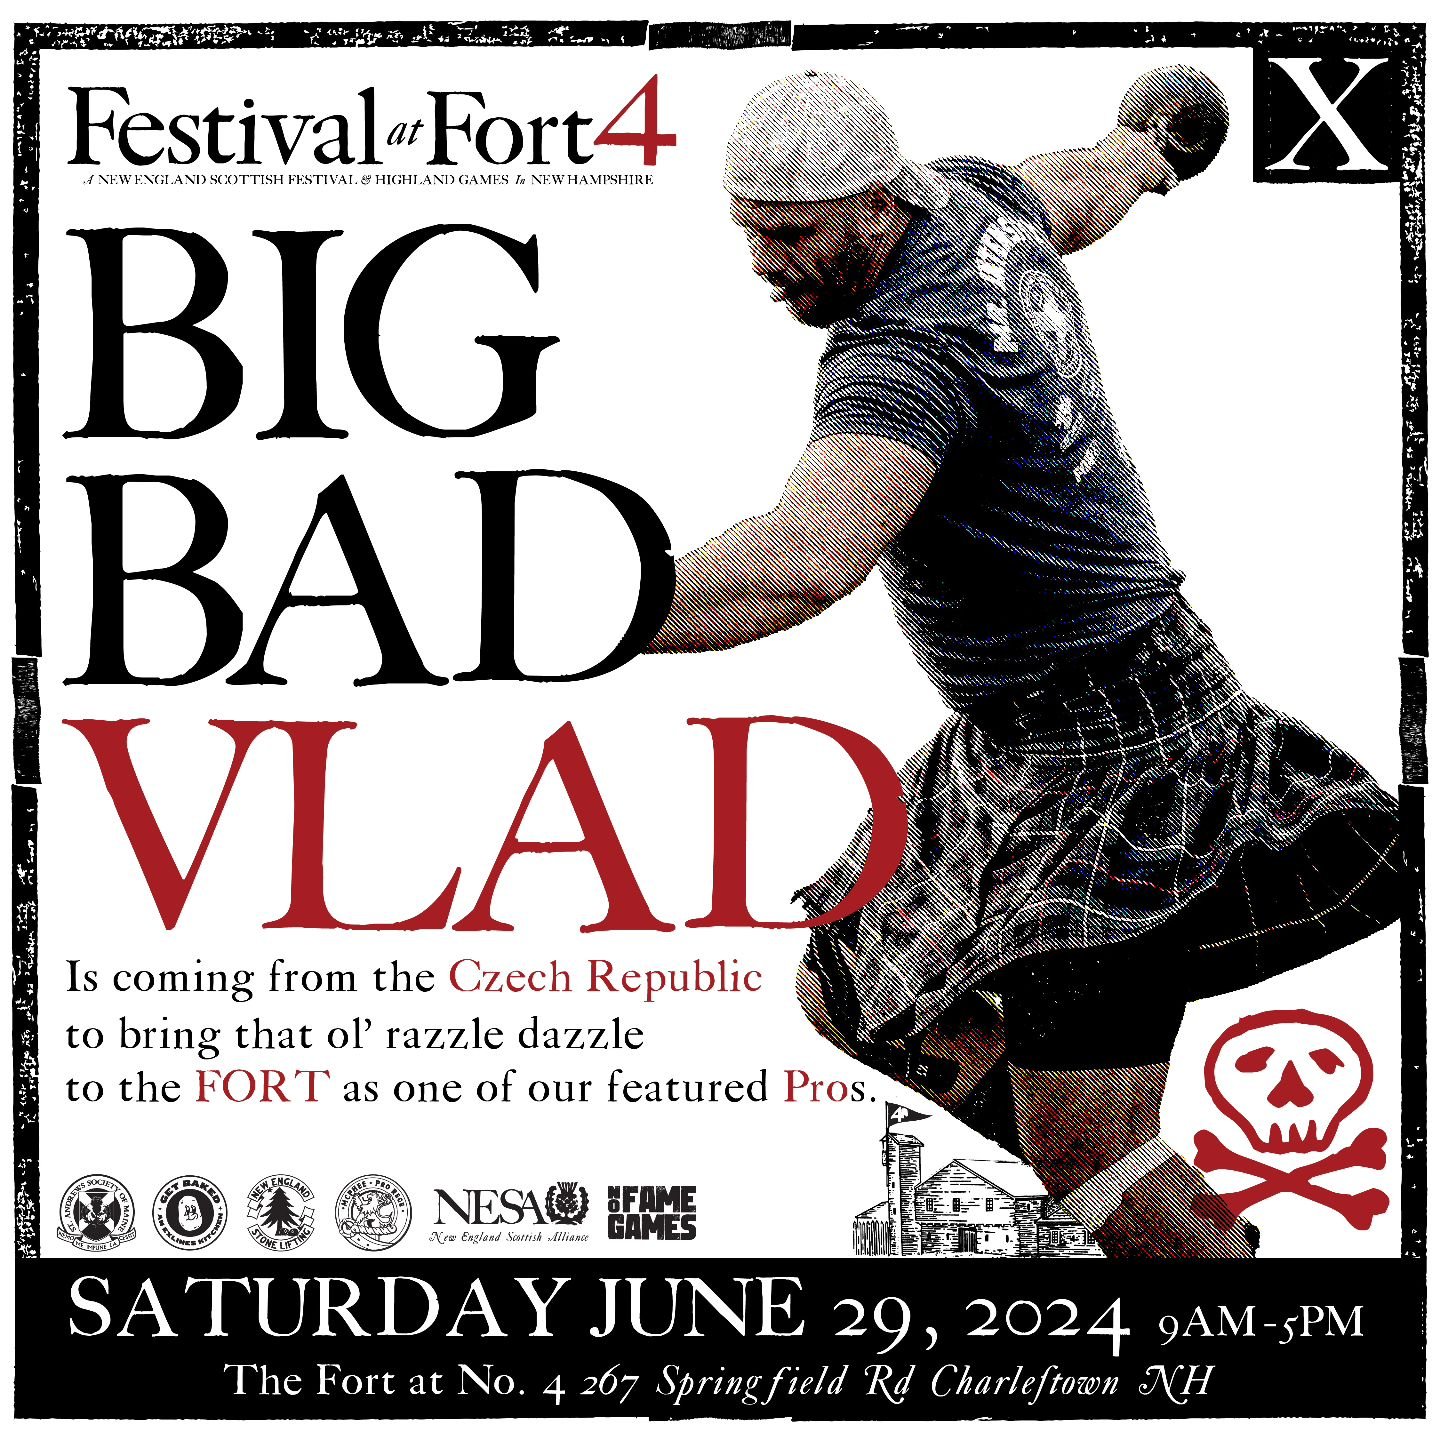 Big bad Vlad is coming all the way from the Czech Republic to bring the ol' razzle dazzle to Fort at no.4 as one of our featured professional highland athletes.

The least you could do is buy a ticket and come see him throw!

Link to tickets in bio.